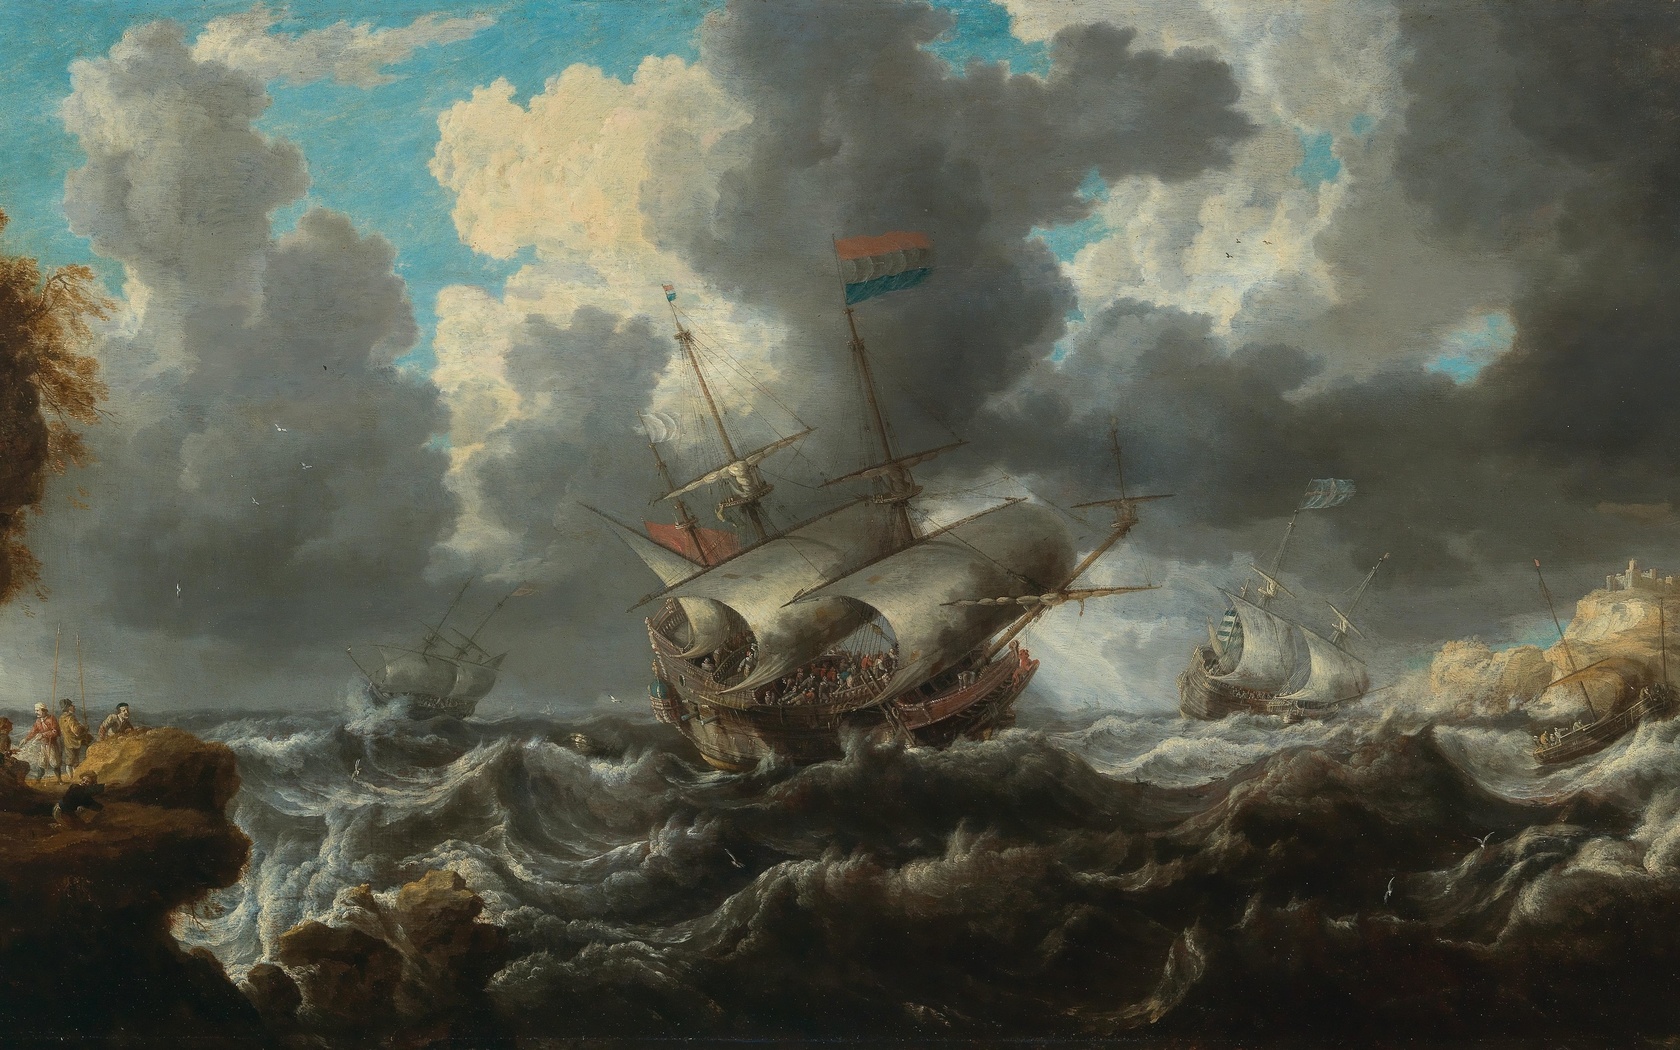 bonaventura peeters, flemish, 1641, a man owar in choppy seas with soldiers on an outcrop nearby